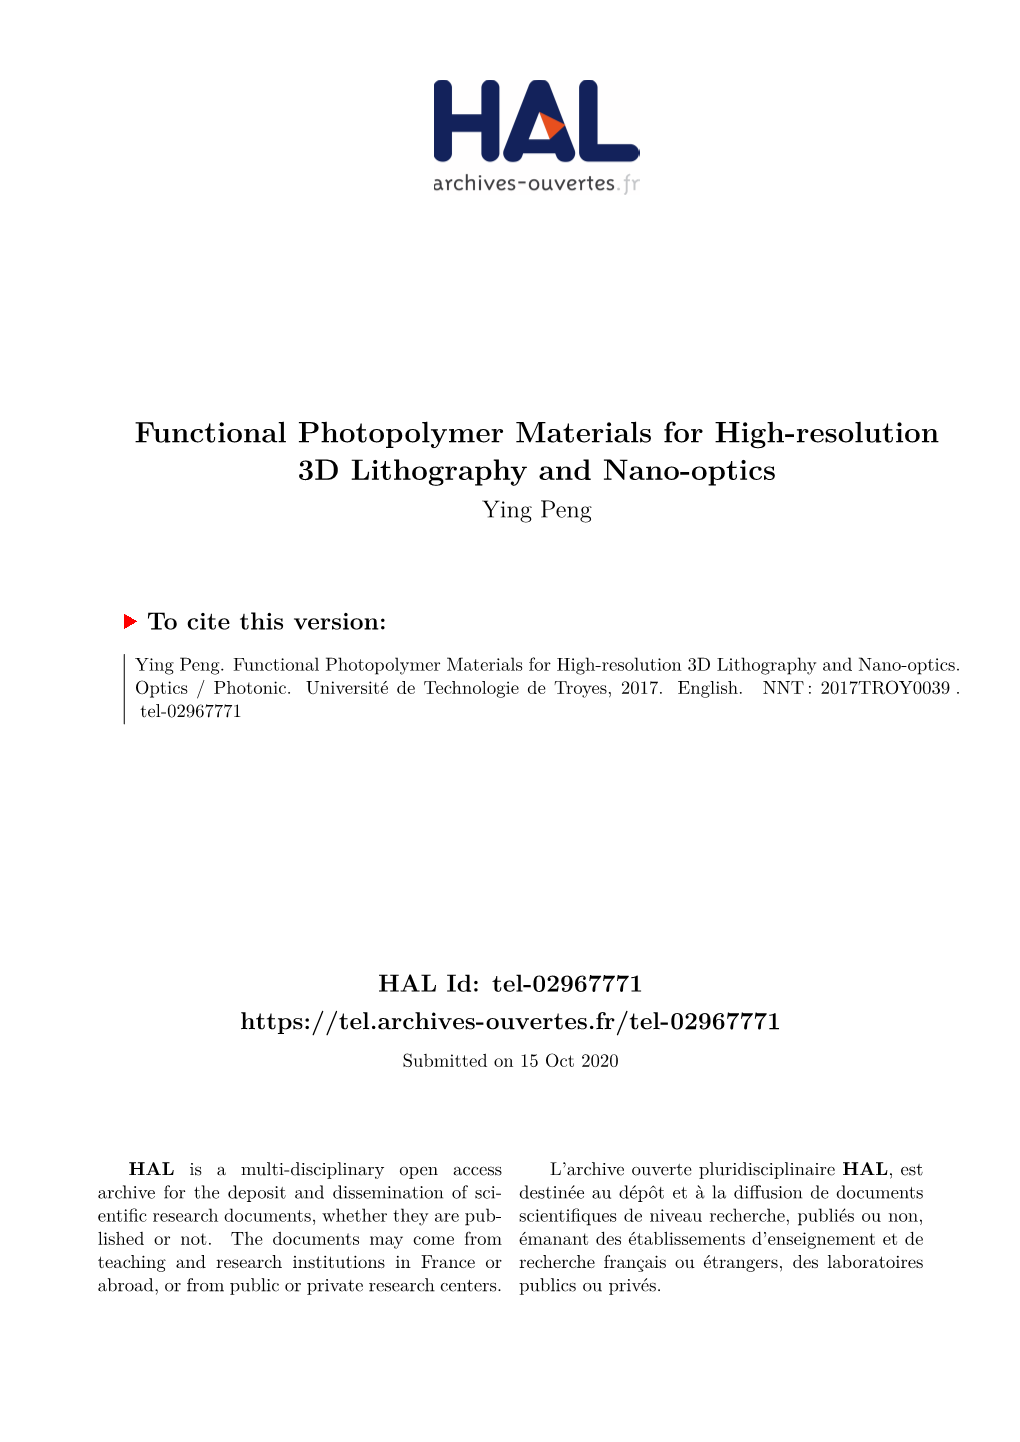 Functional Photopolymer Materials for High-Resolution 3D Lithography and Nano-Optics Ying Peng